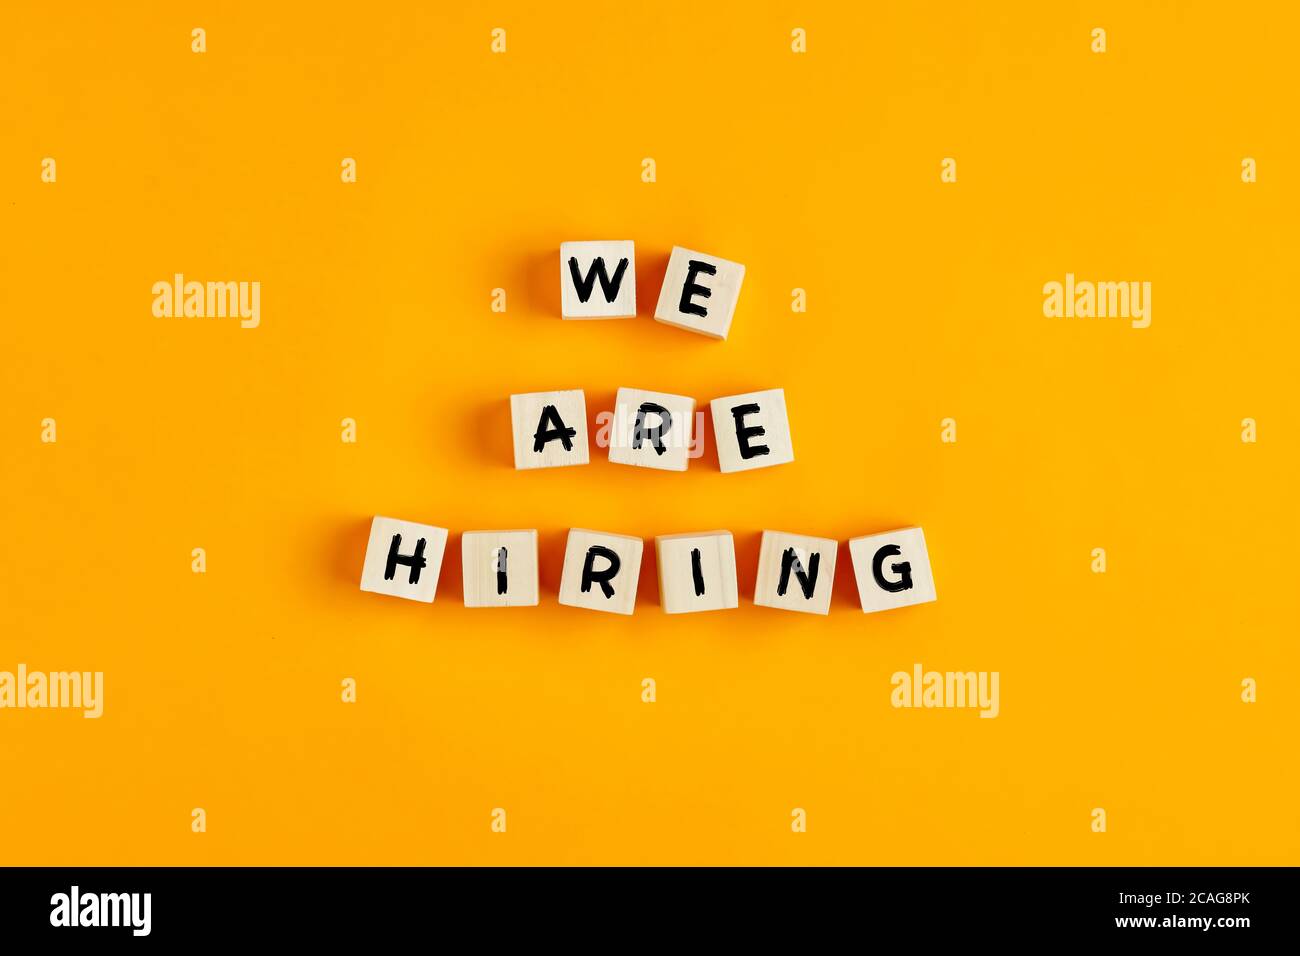 We are hiring text on wooden blocks against yellow background. Concept of human resources recruitment, employment or hire for a job. Stock Photo